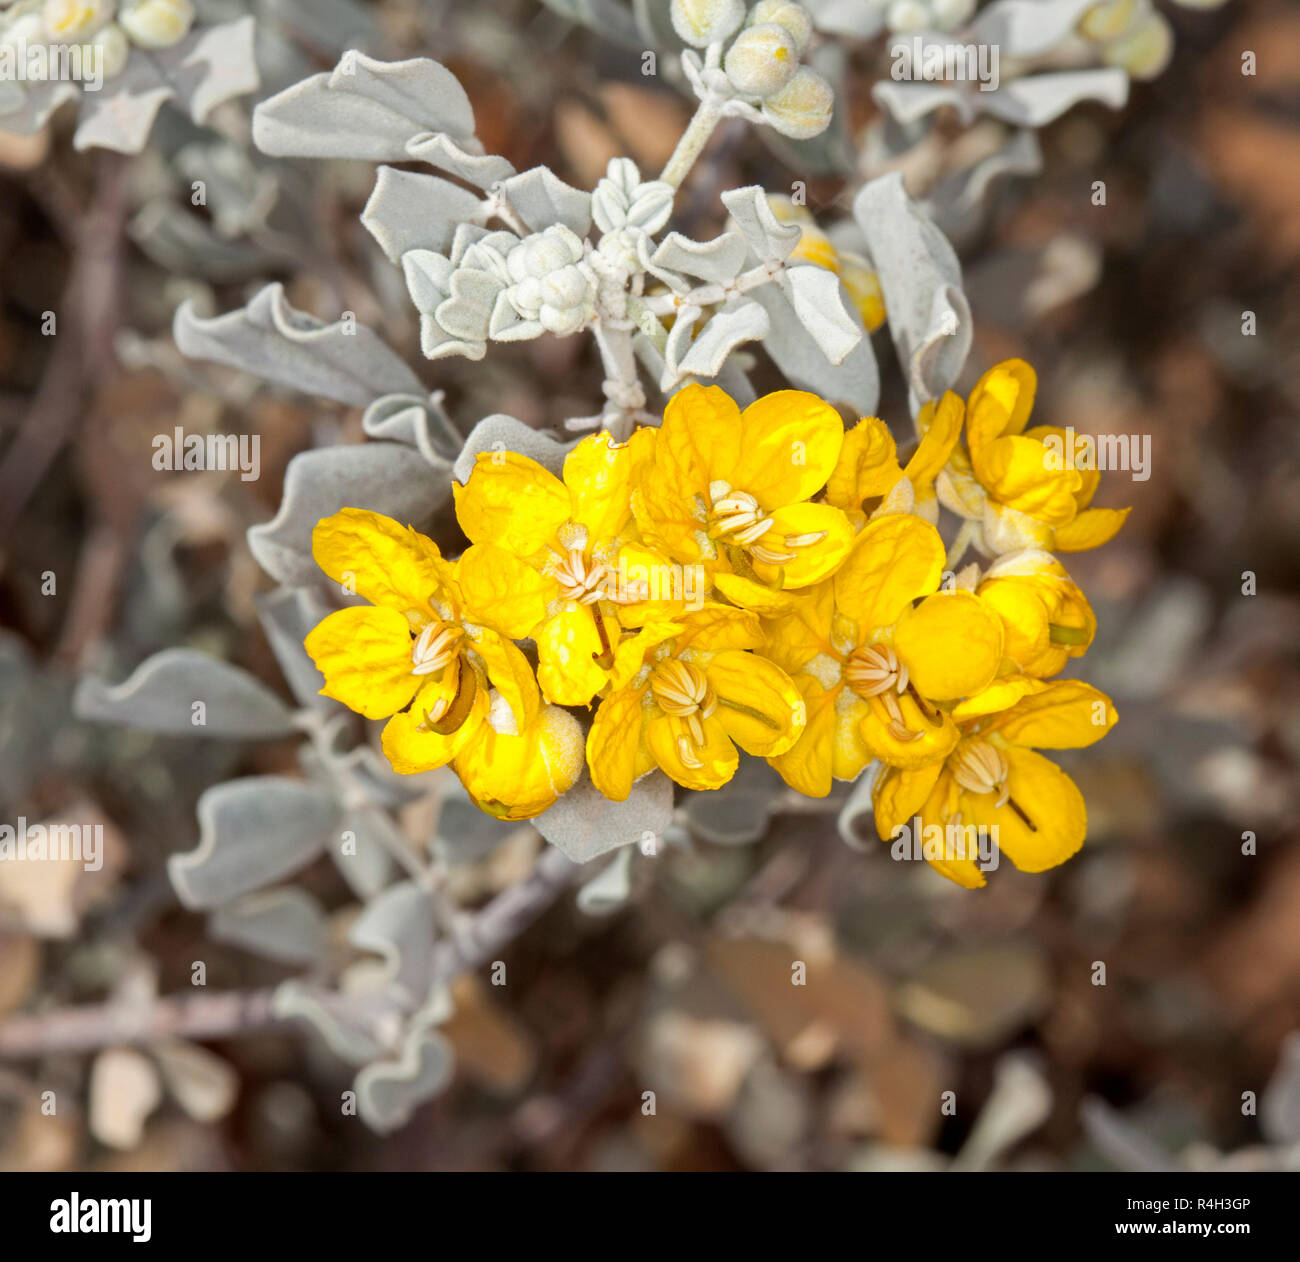 Wildflowers, cluster of vivid yellow flowers and grey / green leaves of Senna / cassia artemisioides, Australian native plant in outback Queensland Stock Photo